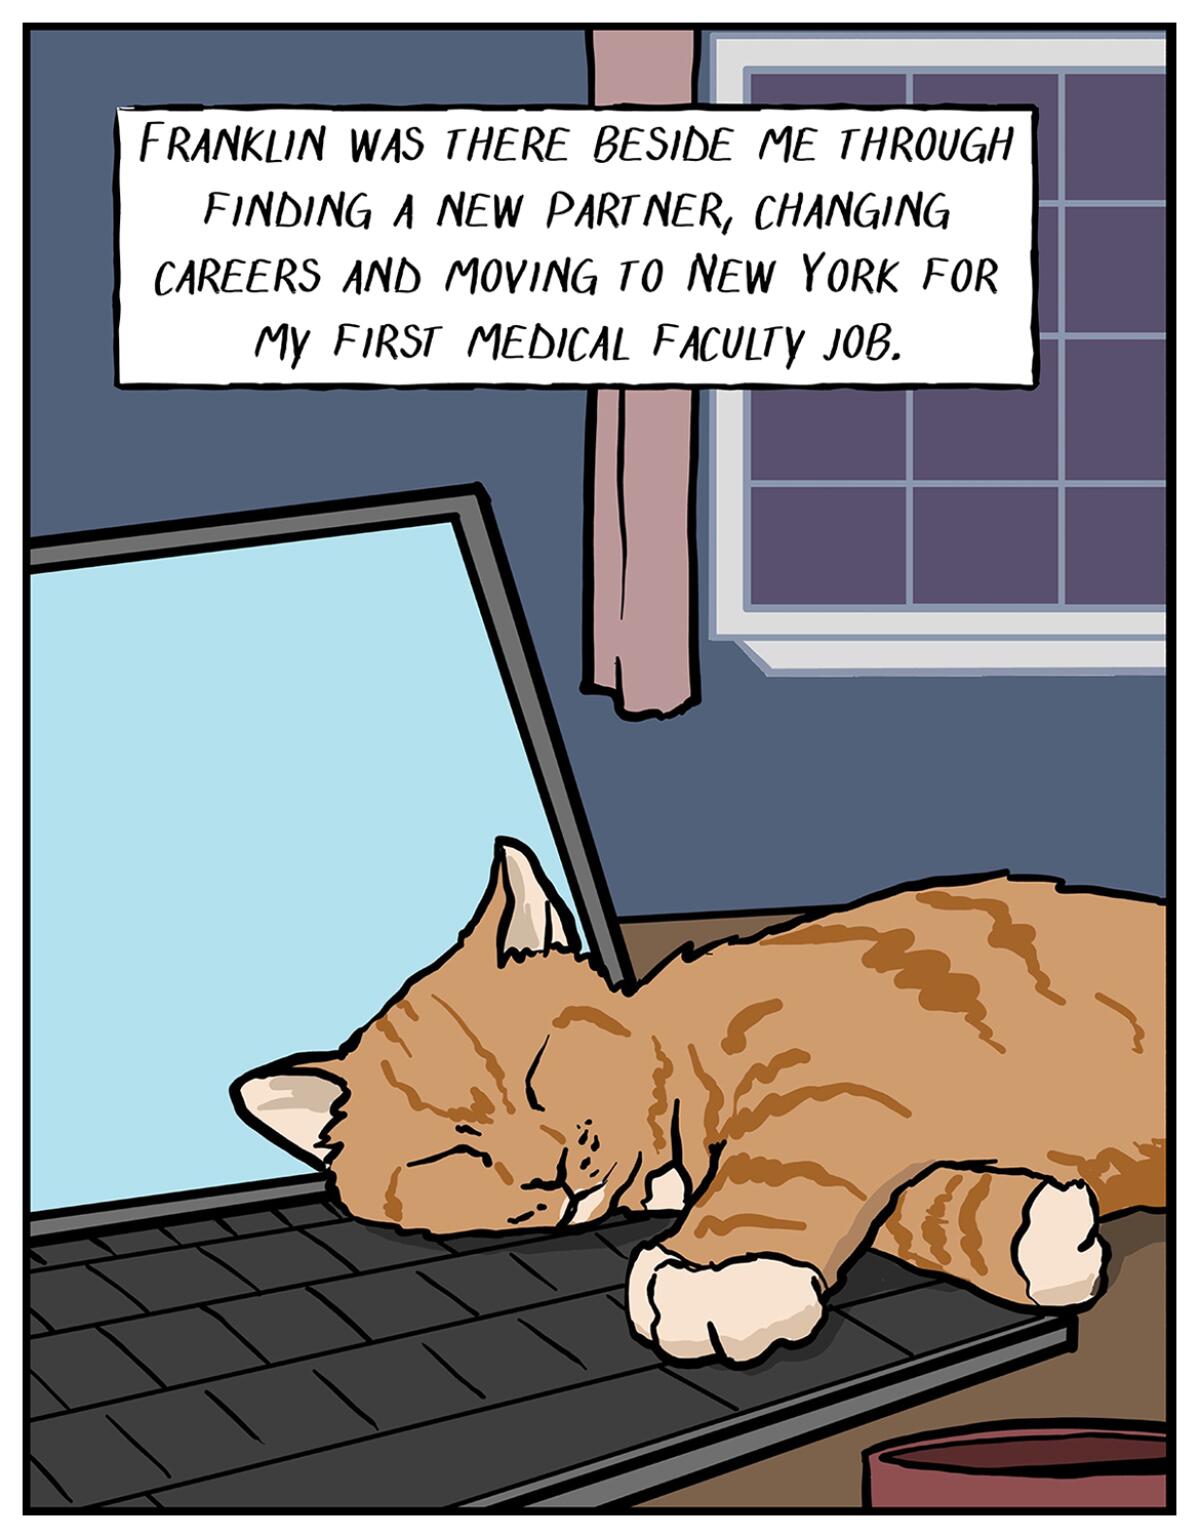 Illustration of  a cat asleep on a computer keyboard